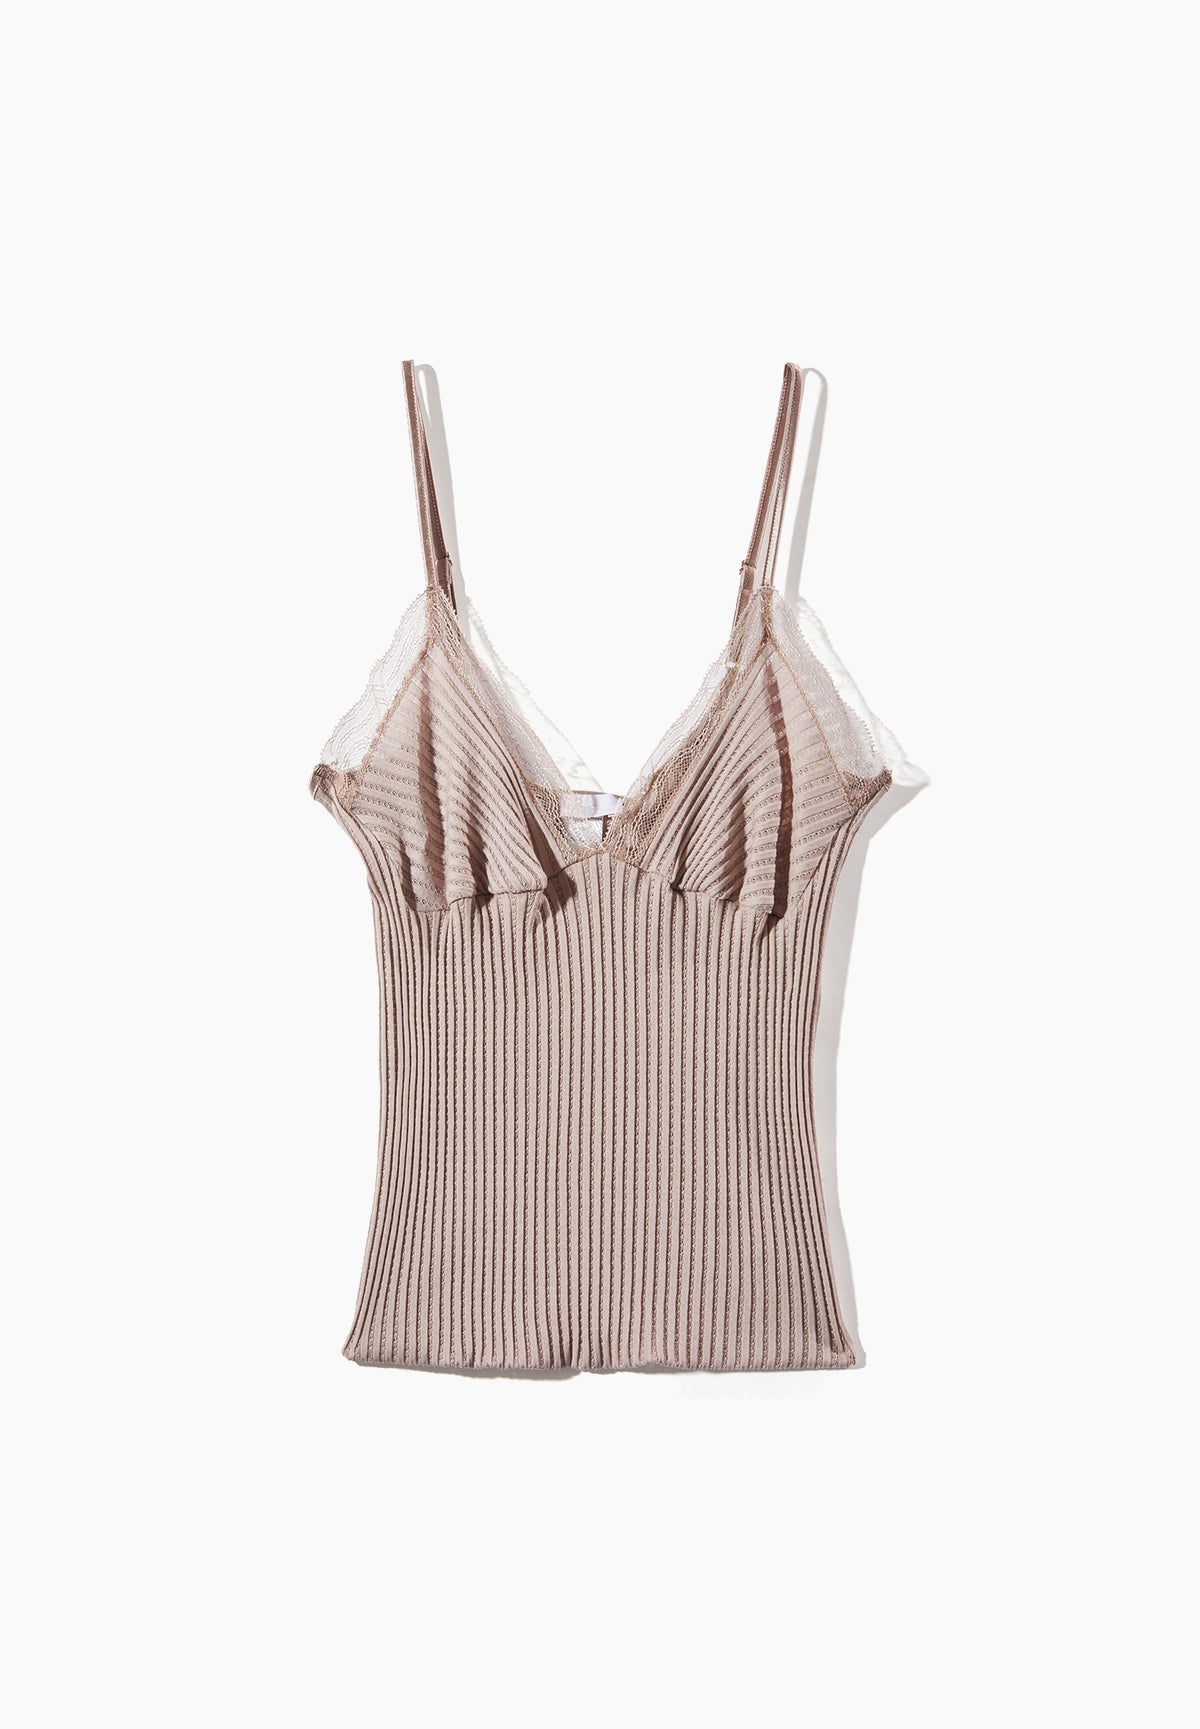 Maude Privé | Top Cropped - pink taupe